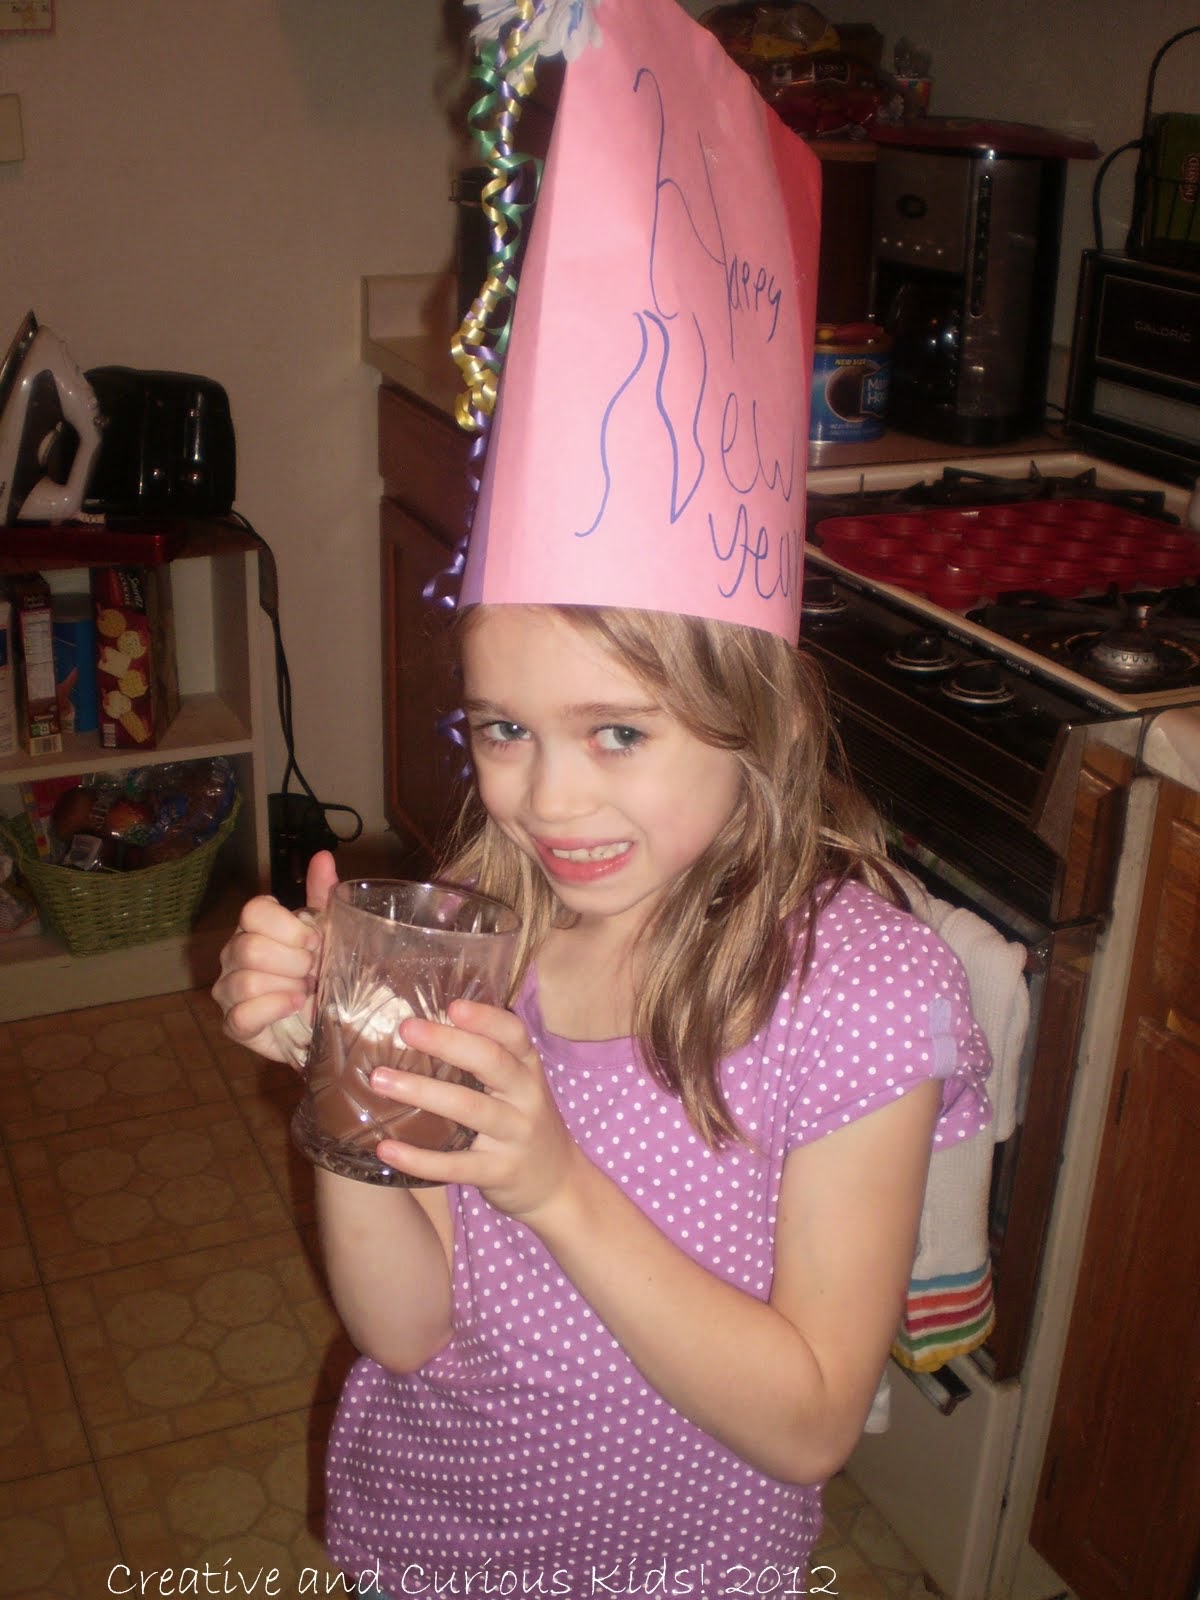 Creative and Curious Kids!: Wordless Wednesday: Homemade Party Hats!